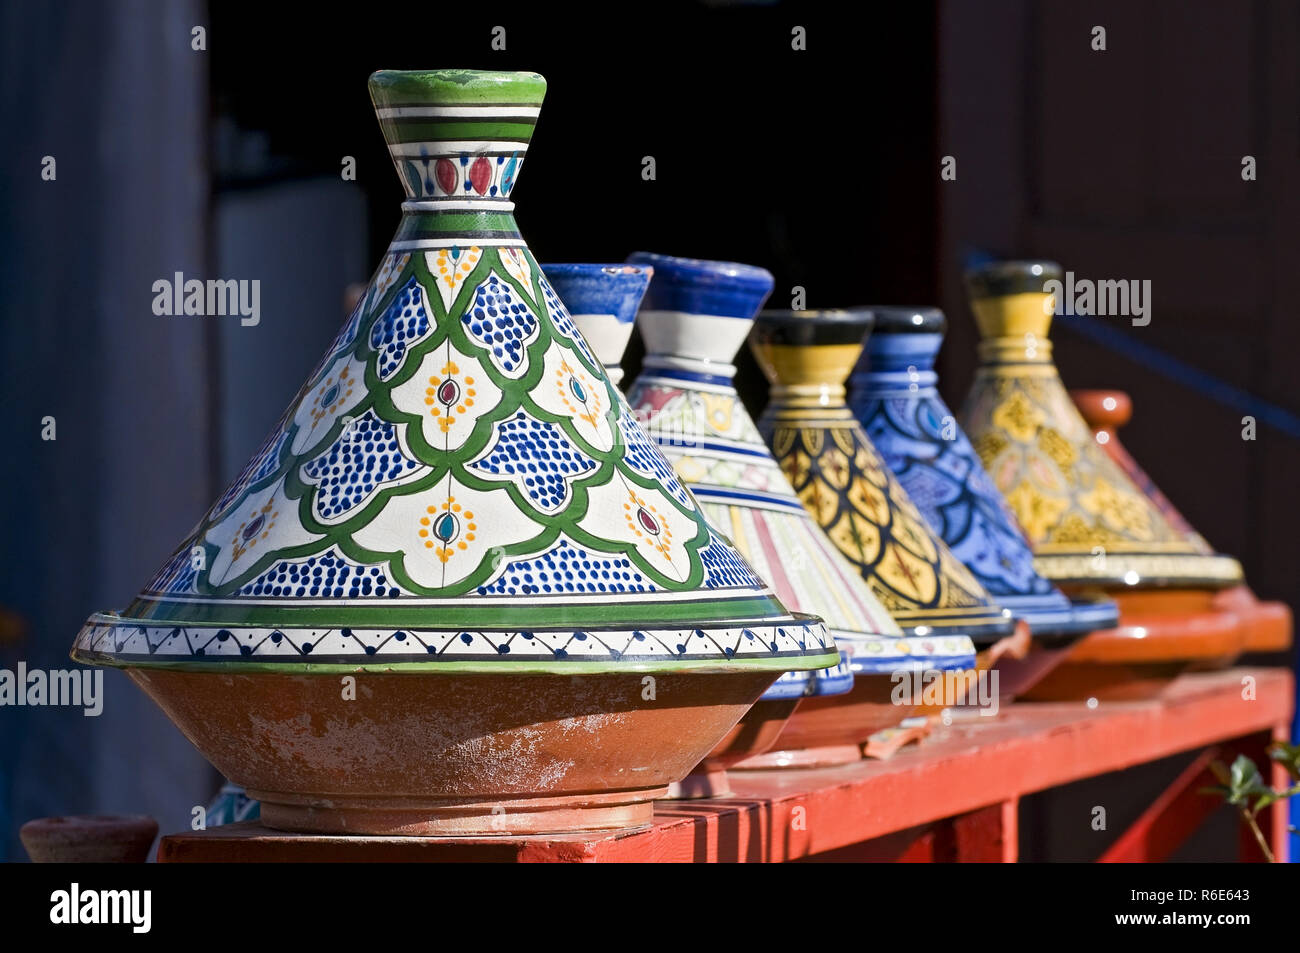 Colorful Tagine Souvenirs For Sale In A Shop In Morocco Stock Photo